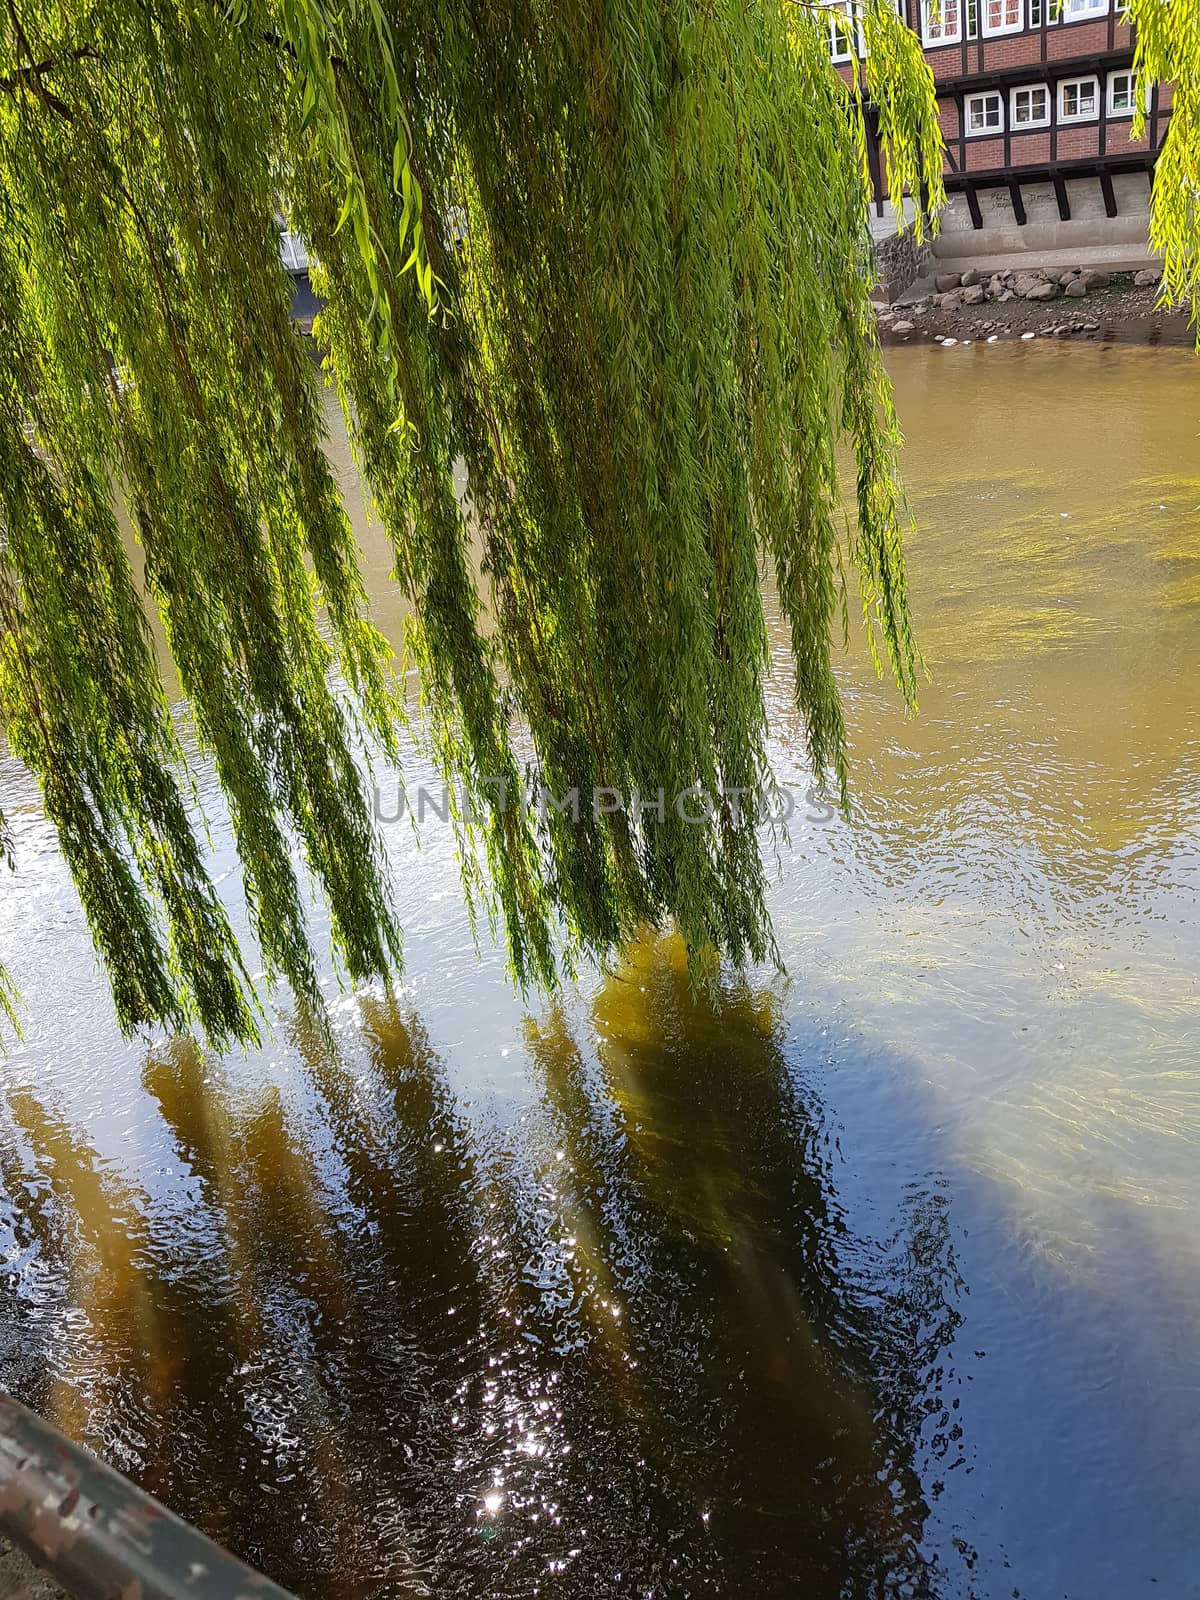 The river Ilmenau with weeping willows by JFsPic